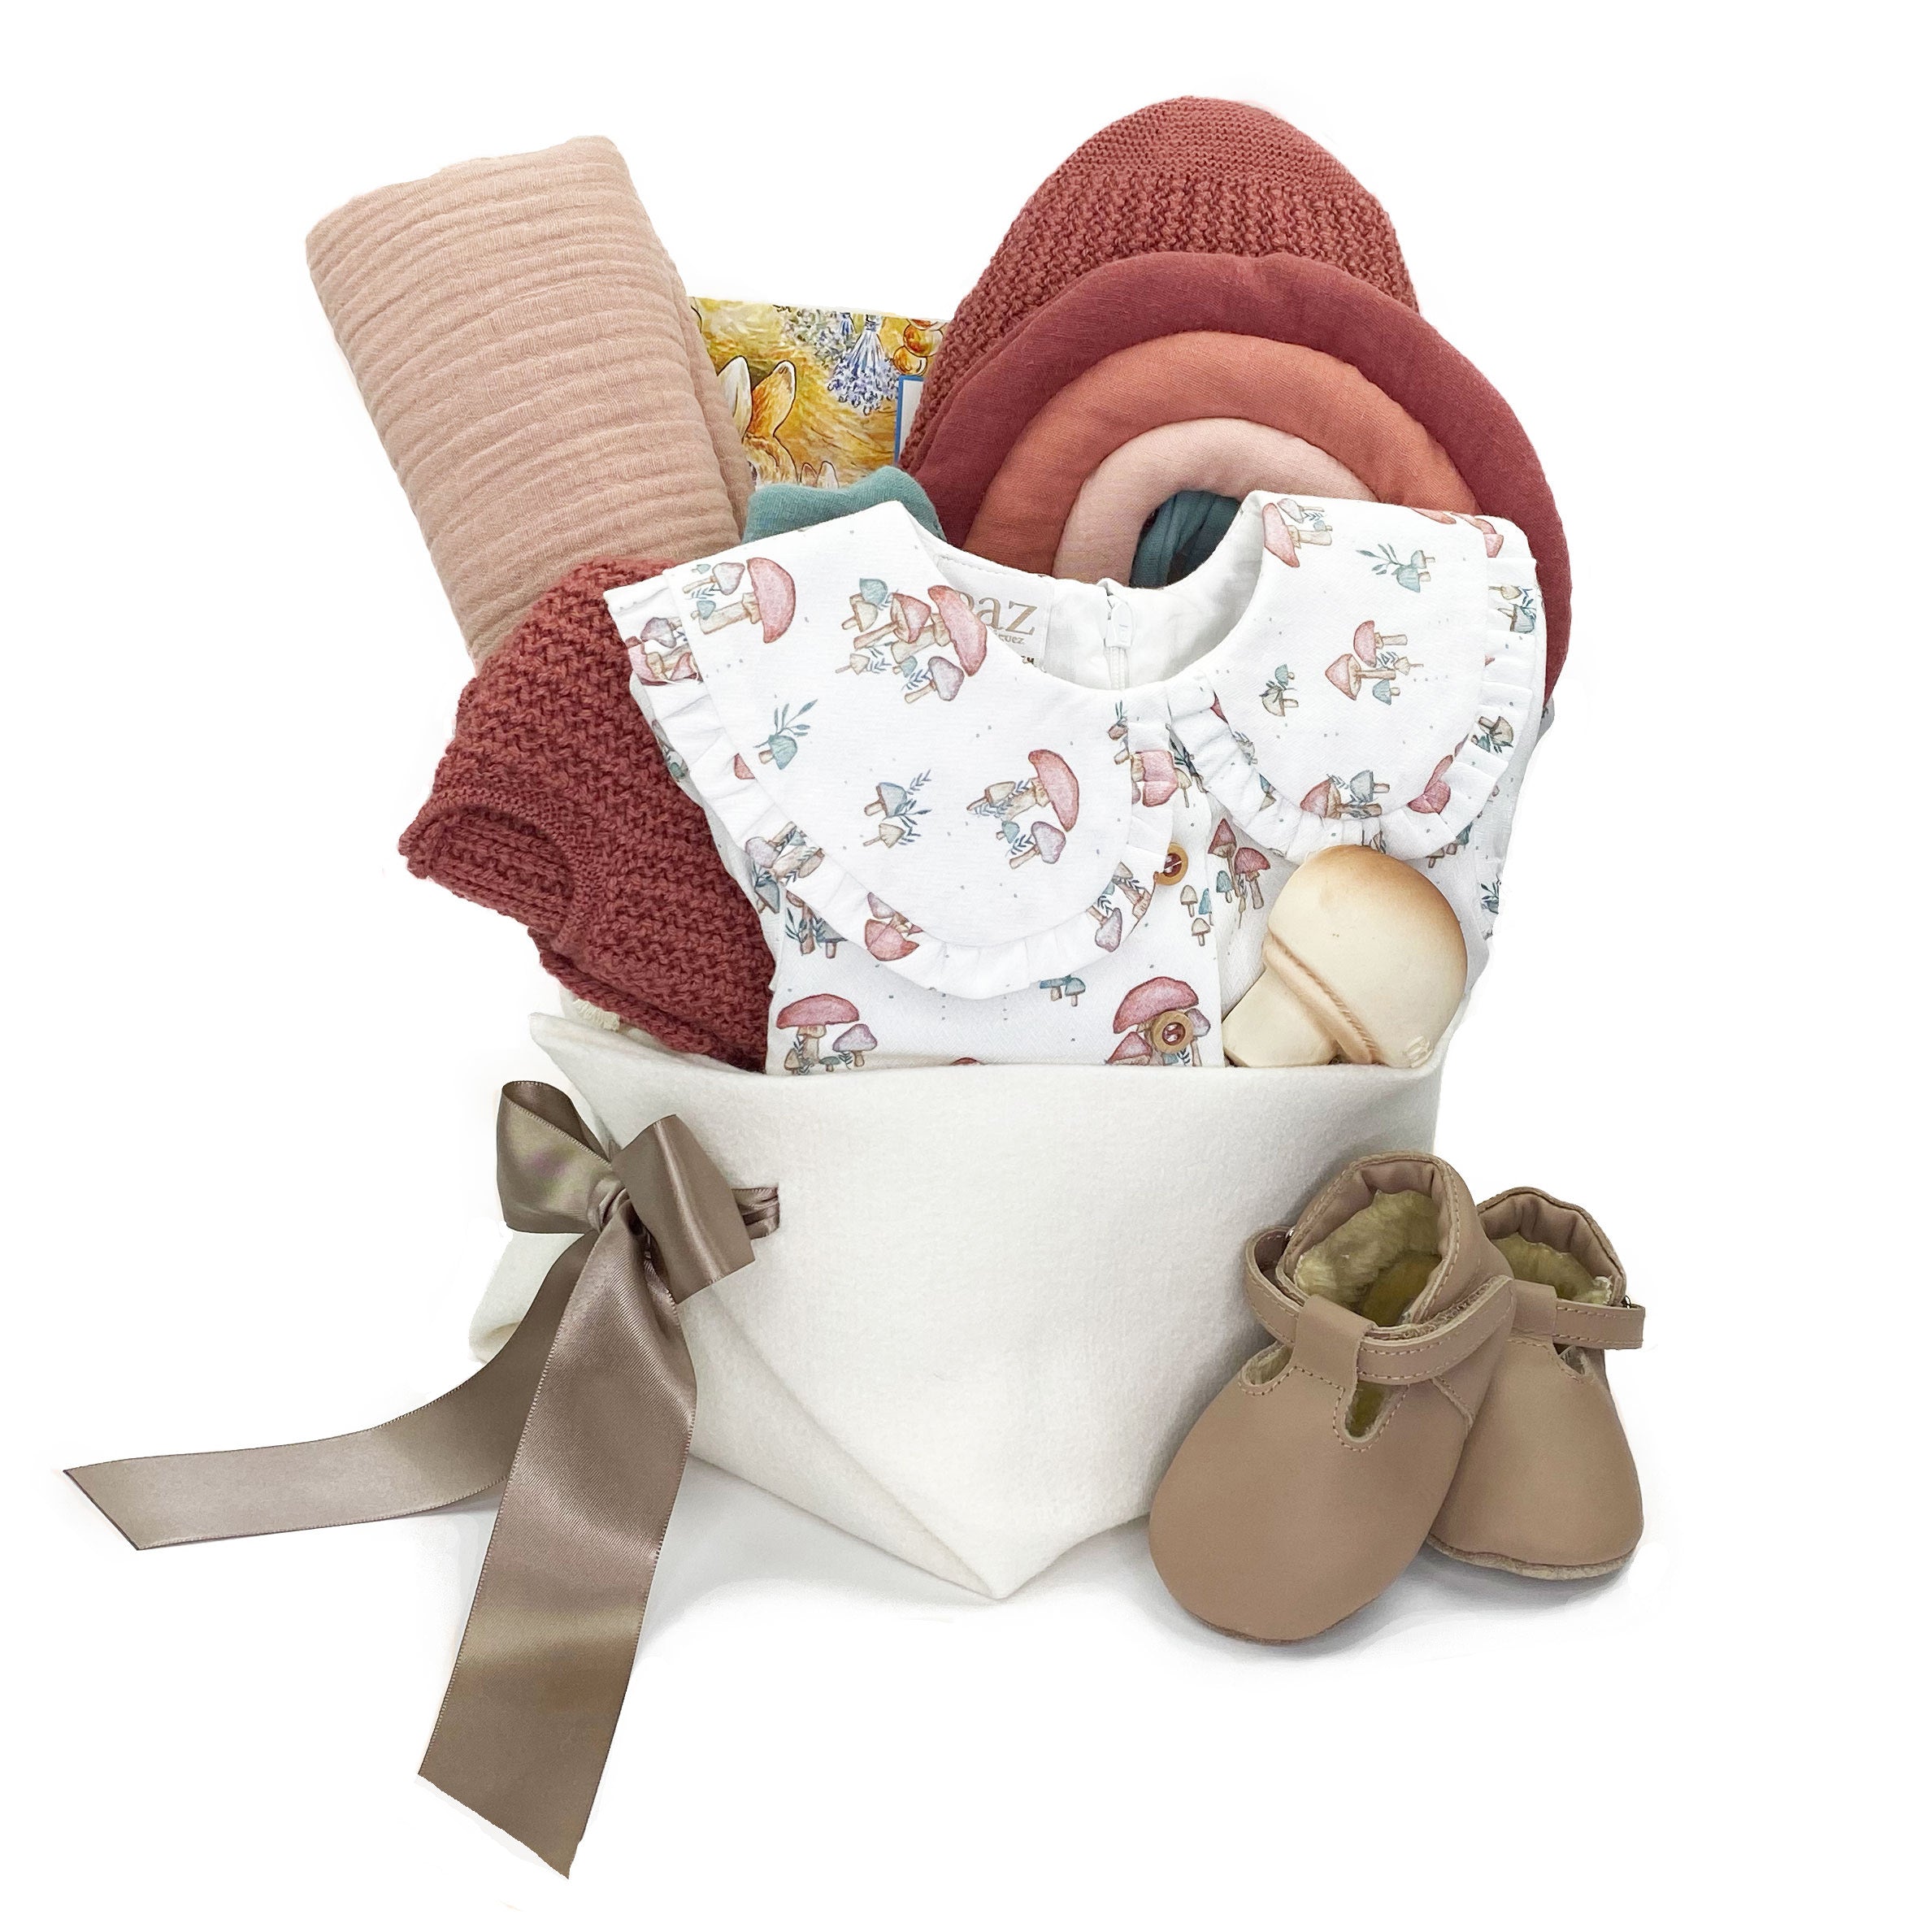 Baby Girl Gift Basket featuring Luxury Baby Gifts by Paz Rodriguez featuring a dress with bloomer in adorable little mushrooms print with knitted cardigan and bonnet, leather shoes and curated accessories by Bonjour Baby Baskets 